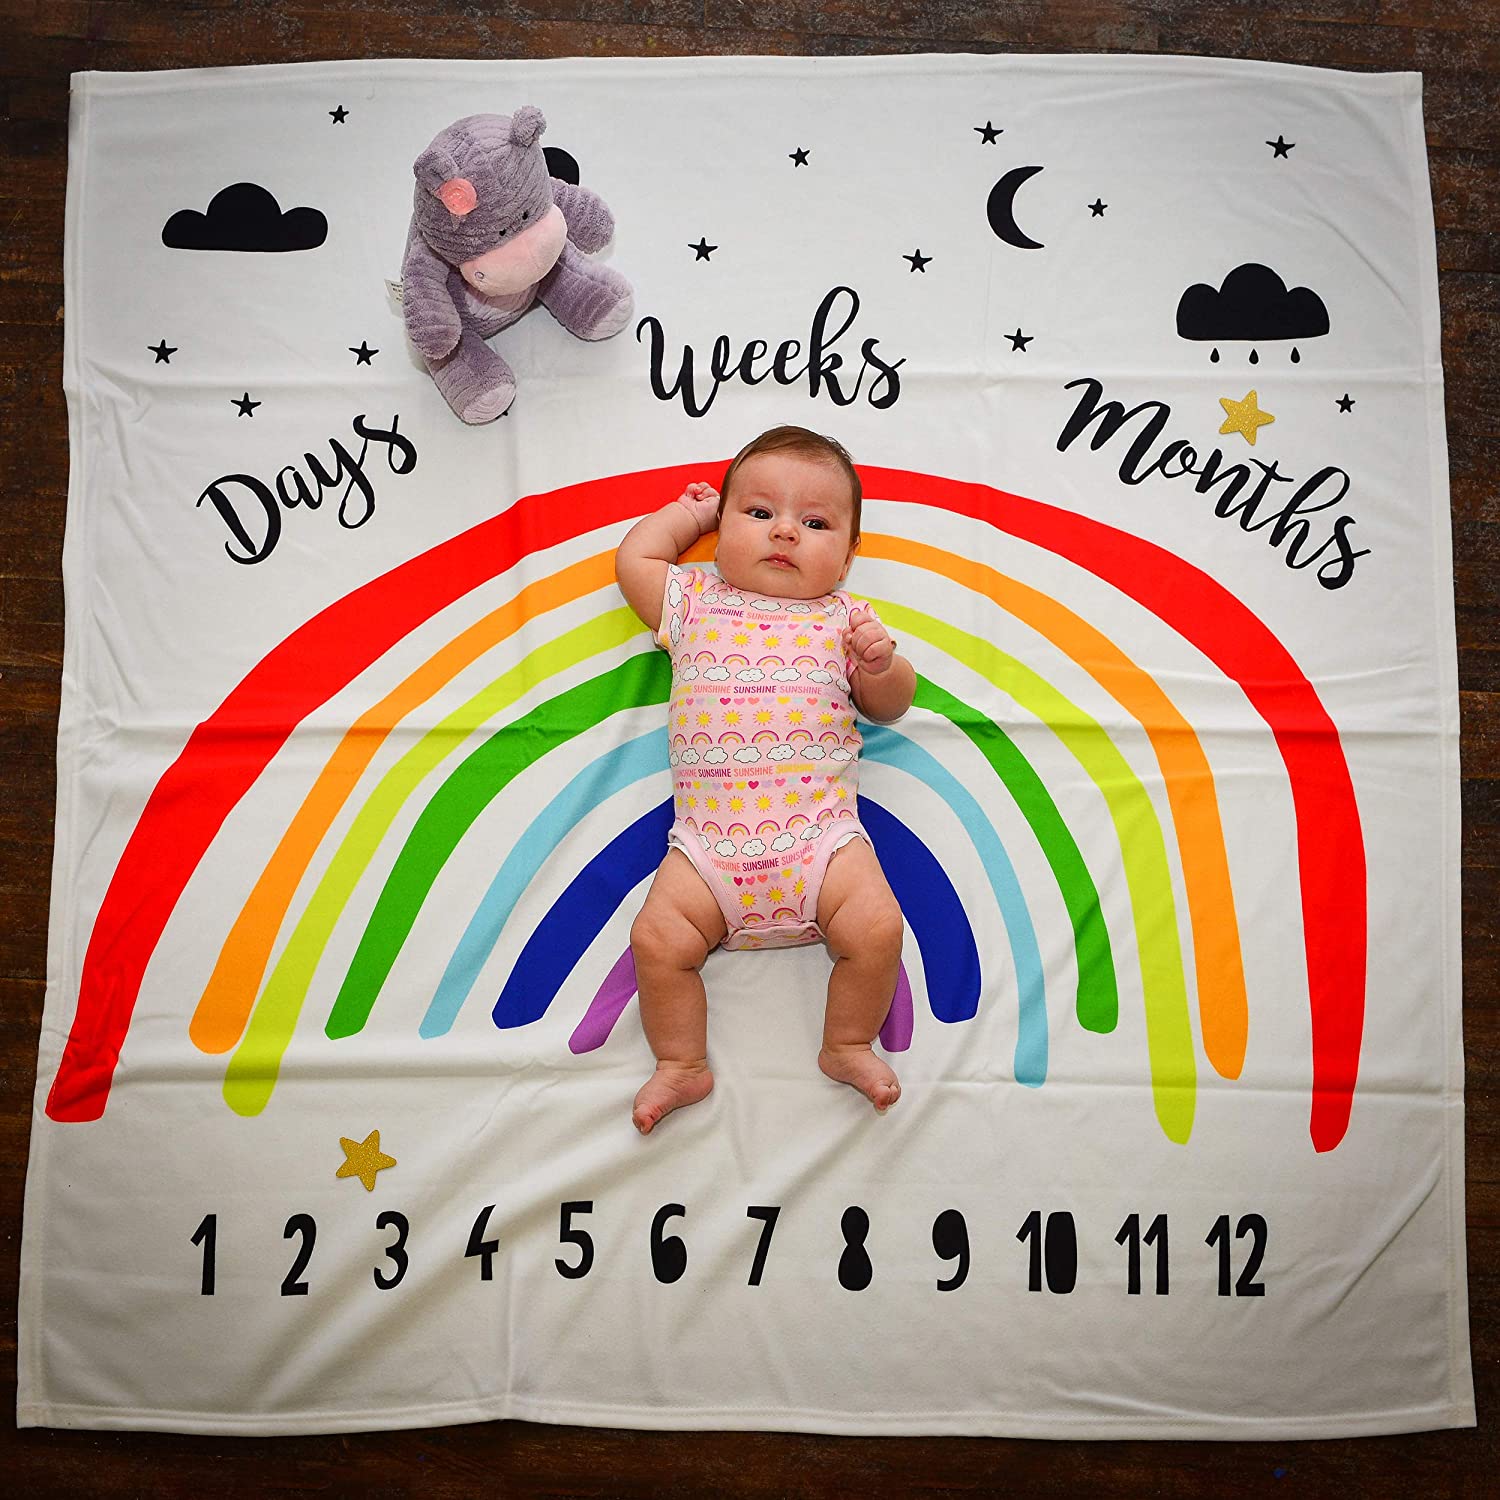 AFTER EVERY STORM RAINBOW NEW BABY HOSPITAL BAG BLANKET IVF or MISCARRIAGE 